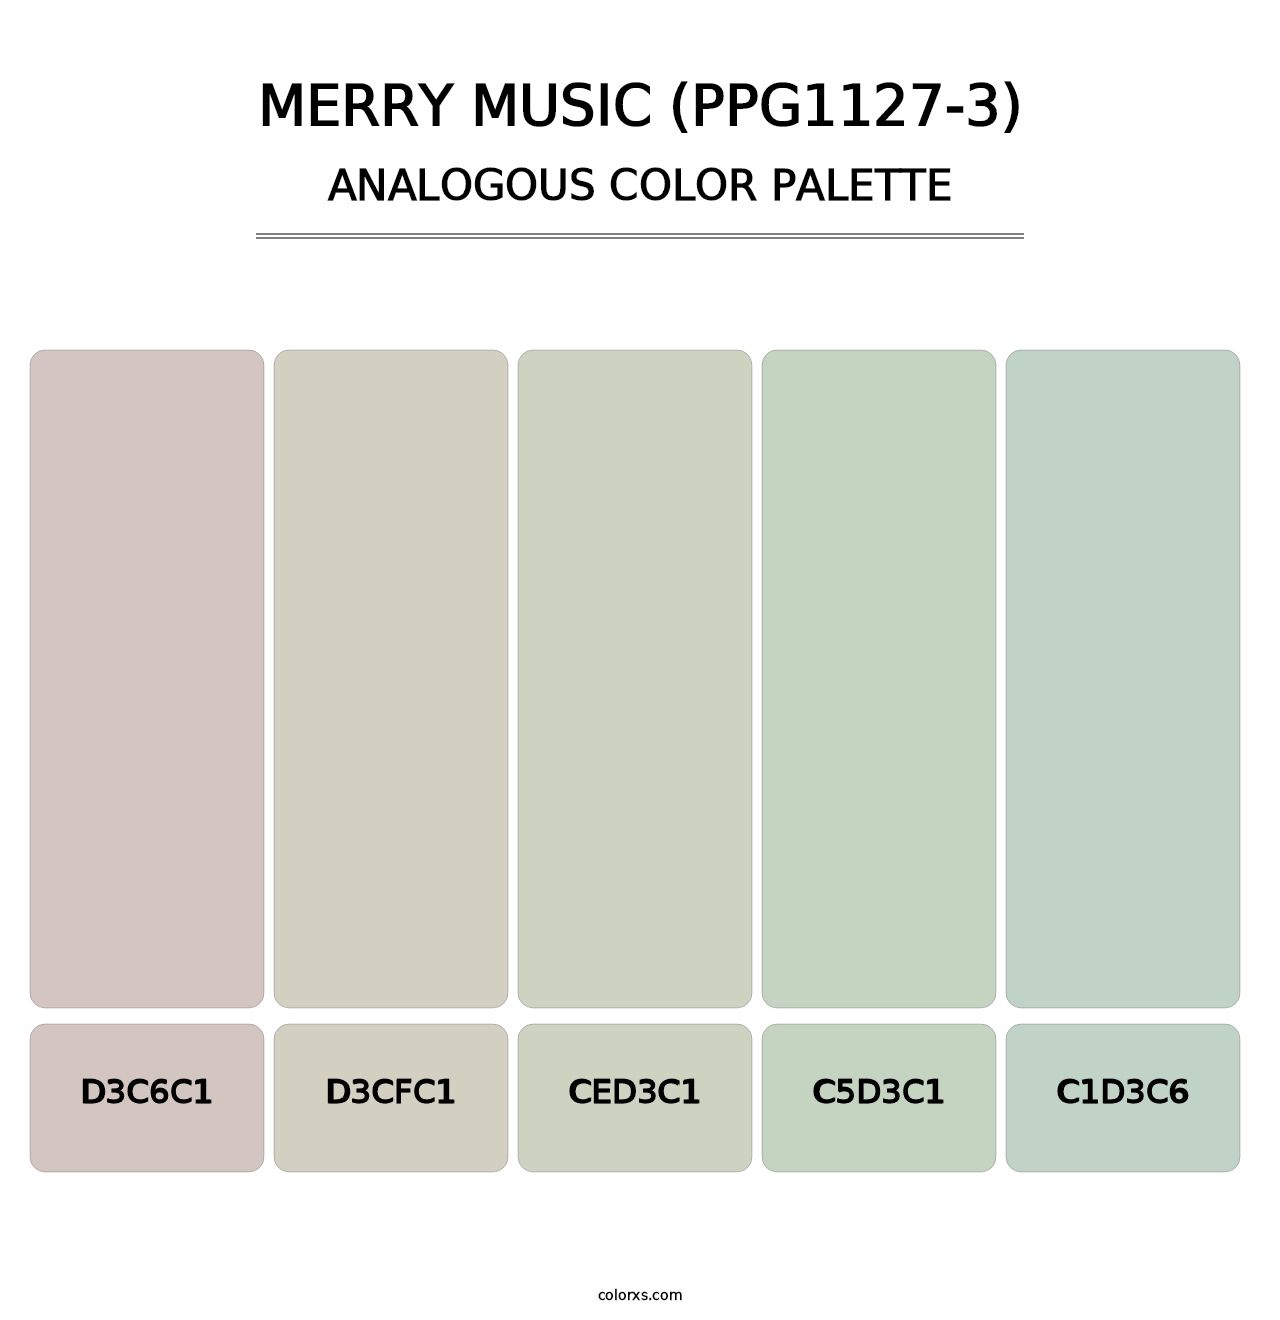 Merry Music (PPG1127-3) - Analogous Color Palette